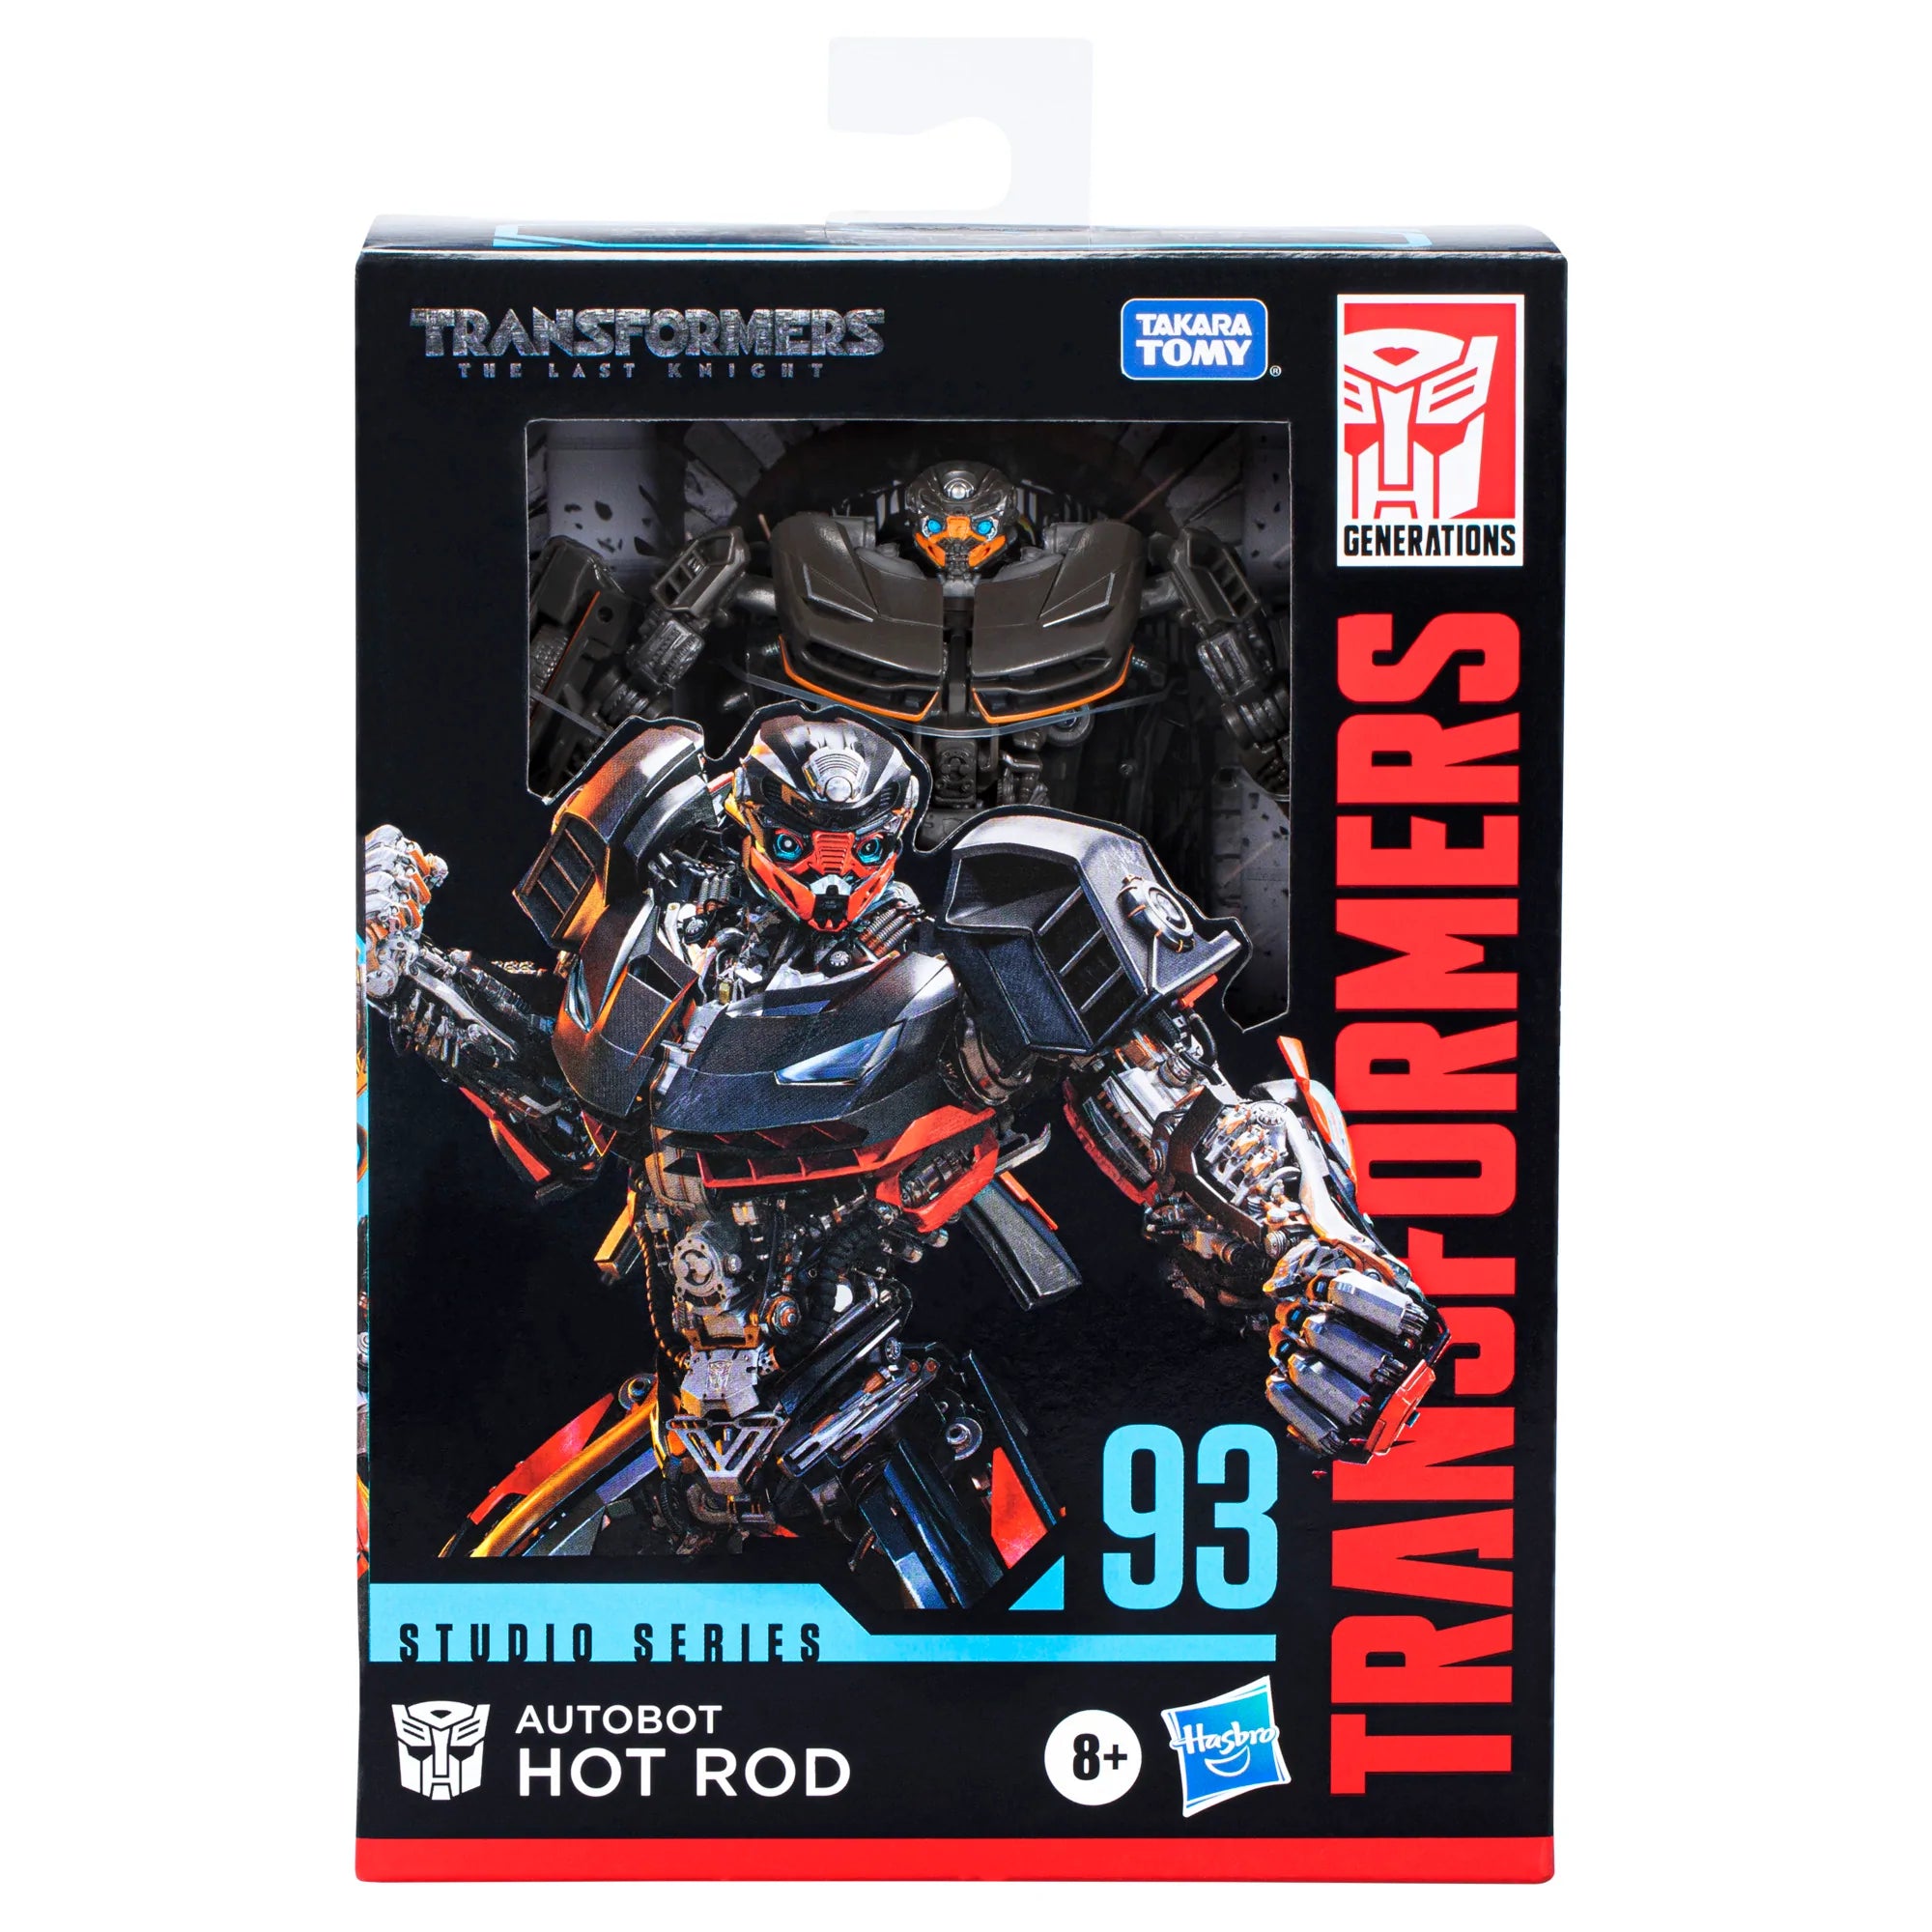 Hasbro - Transformers Generations - Studio Class 93 - Deluxe Class - Transformers: The Last Knight - Autobot Hot Rod - Marvelous Toys